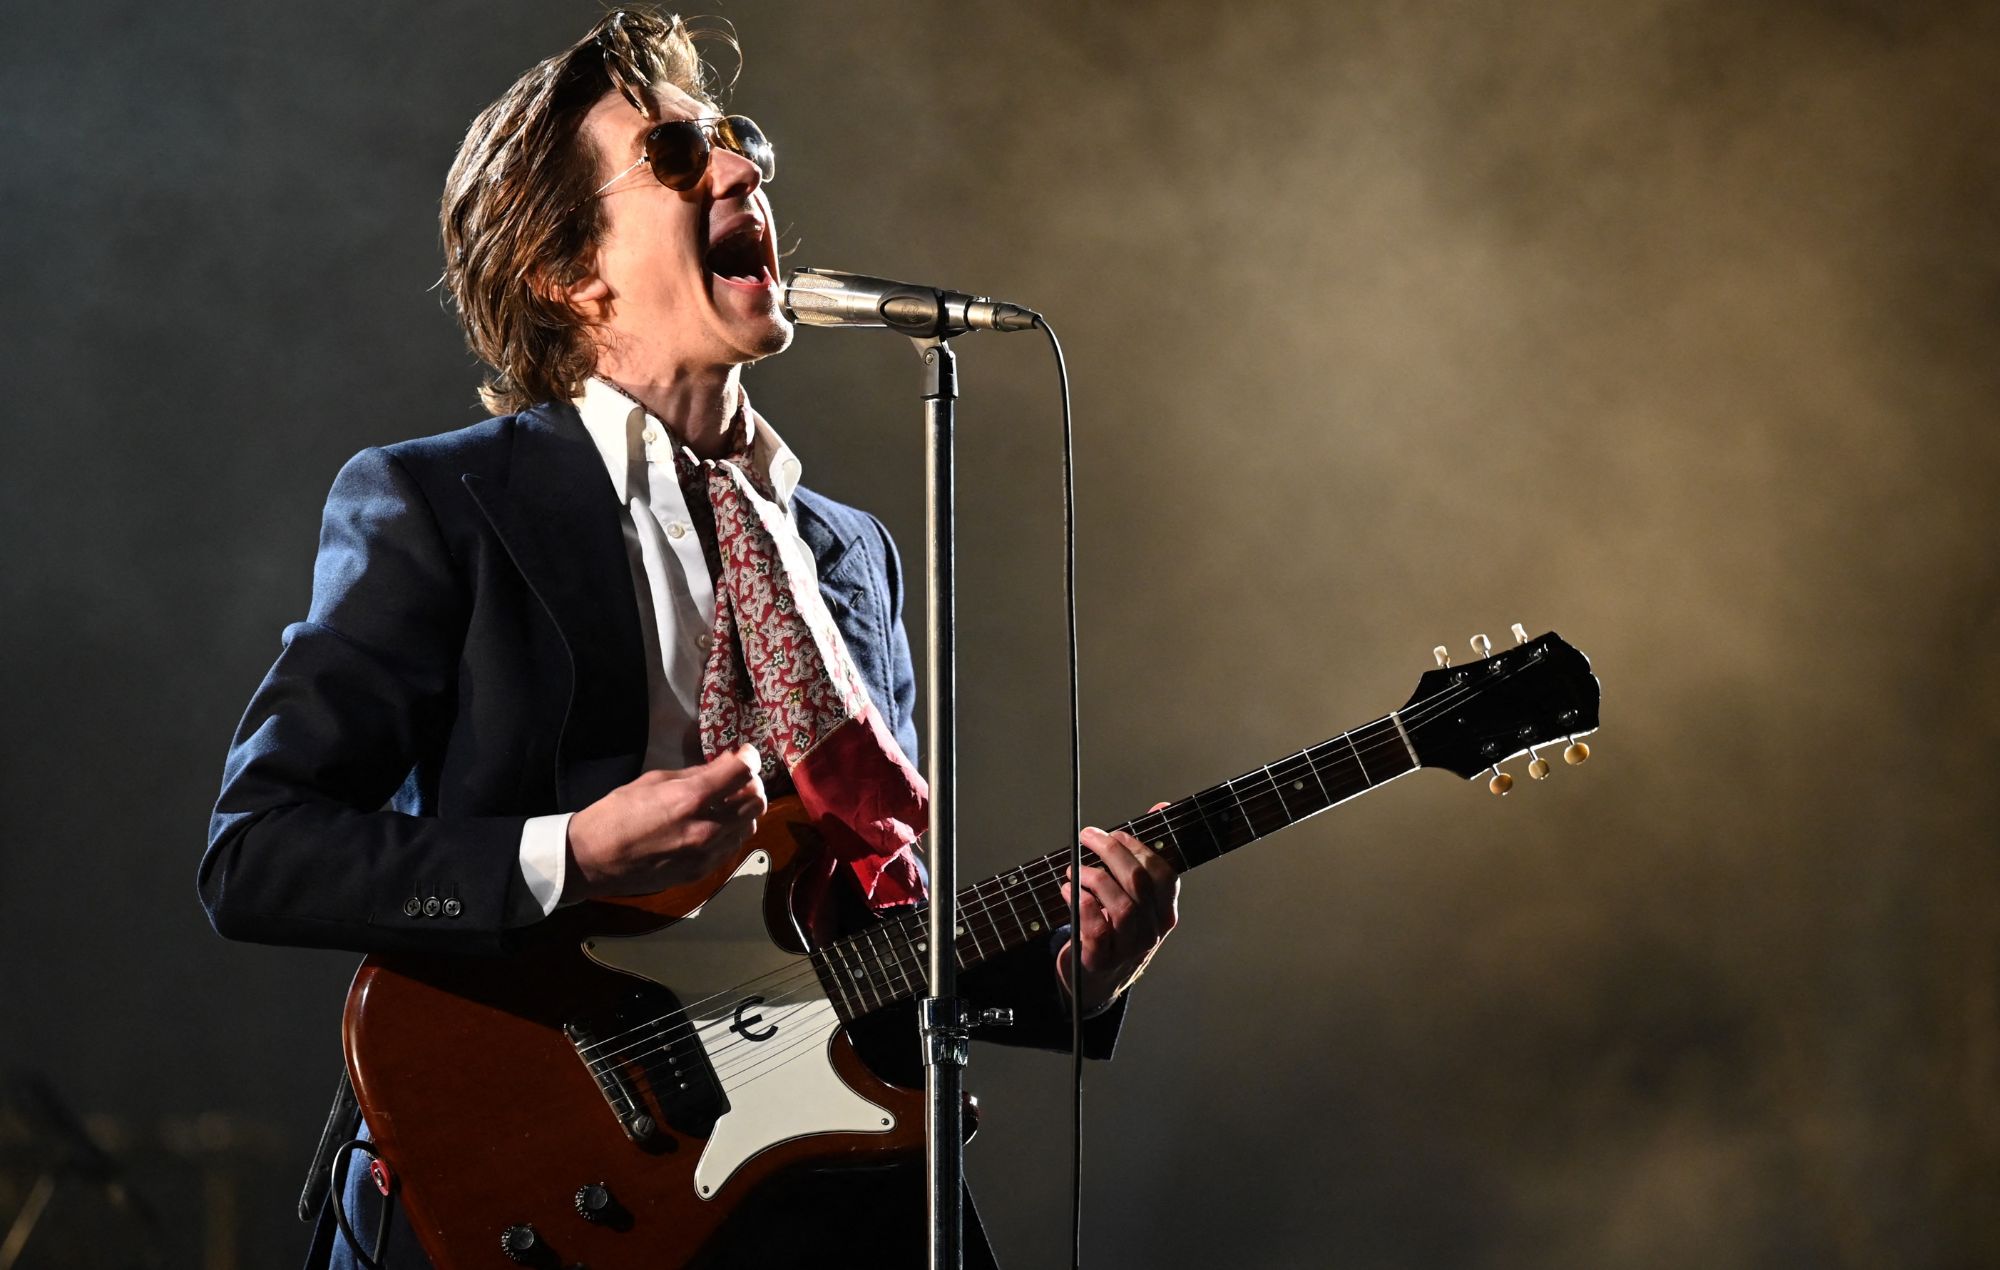 Arctic Monkeys kick off 2023 UK tour with first performance of ‘Mardy Bum’ in 10 years